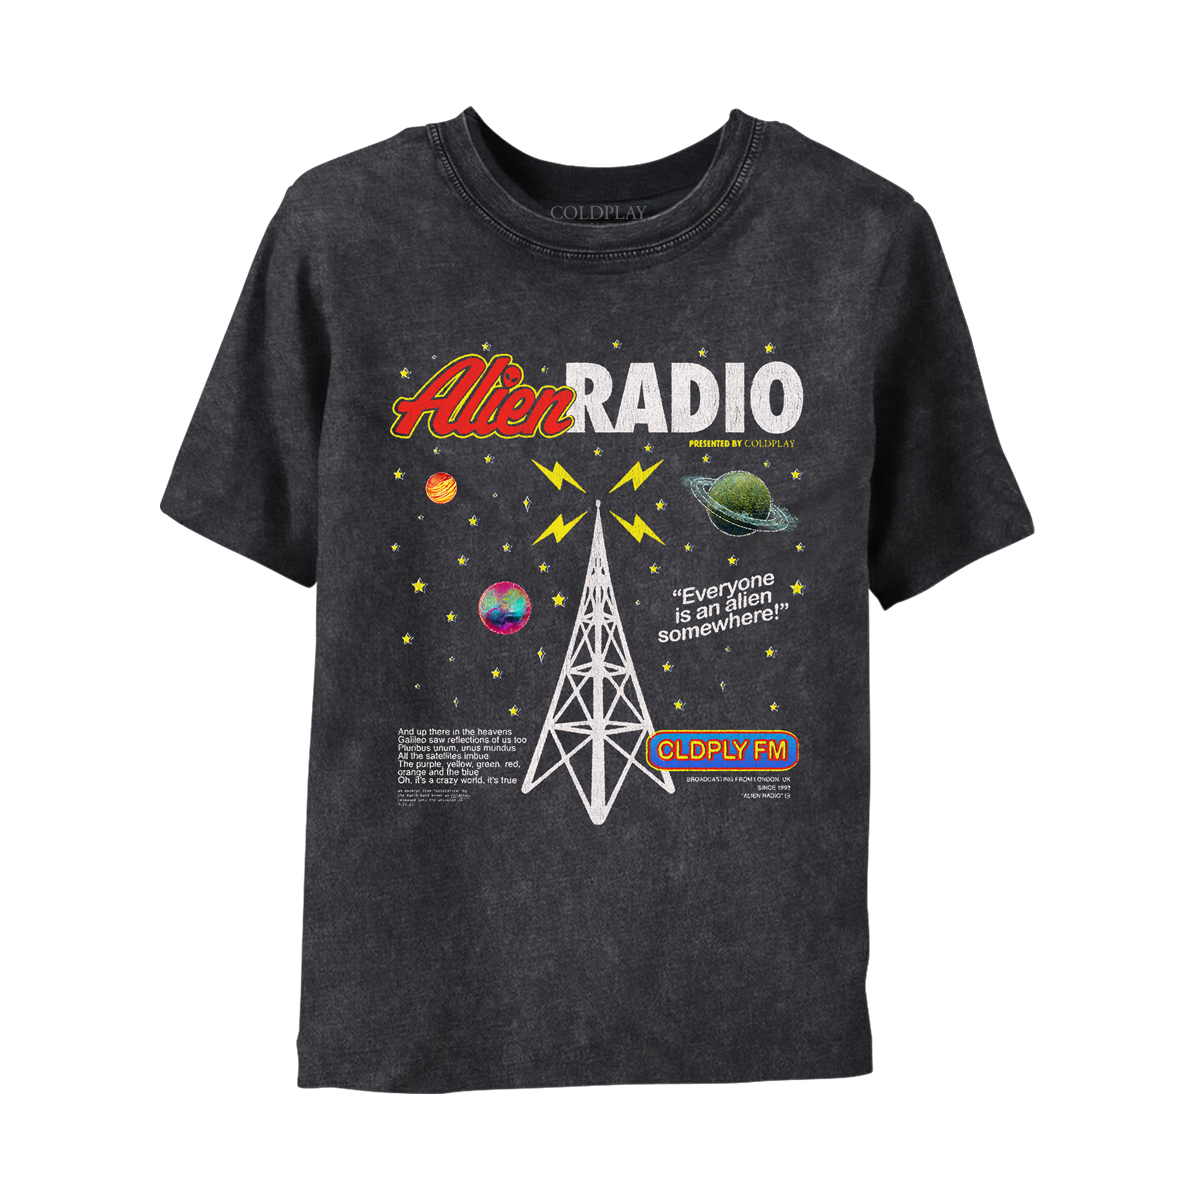 ALIEN RADIO MUSIC OF THE SPHERES WORLD TOUR YOUTH TEE